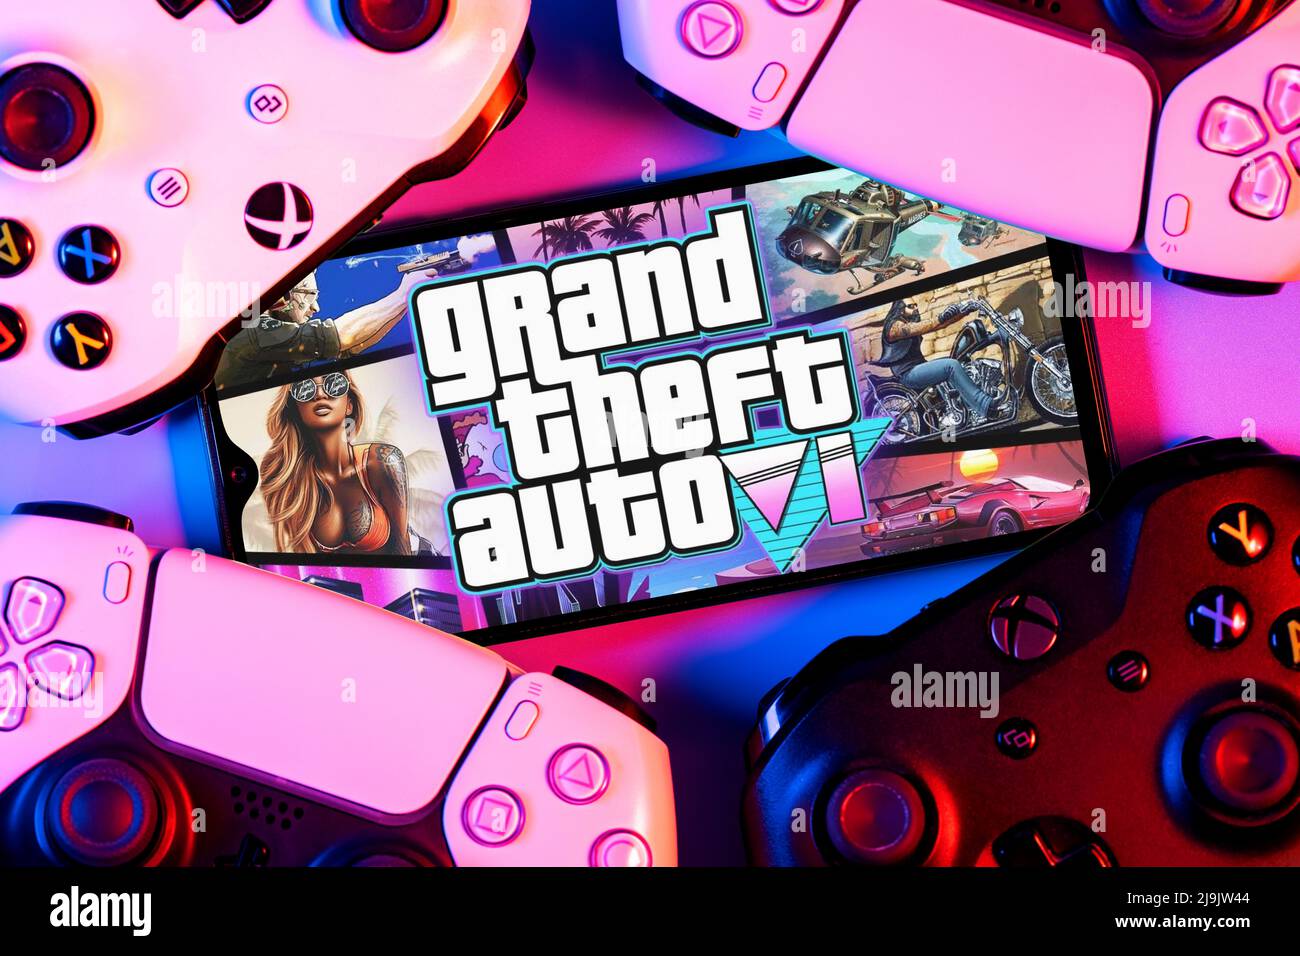 Smartphone with concept of GTA 6 logo on screen surrounded by gamepads Stock Photo